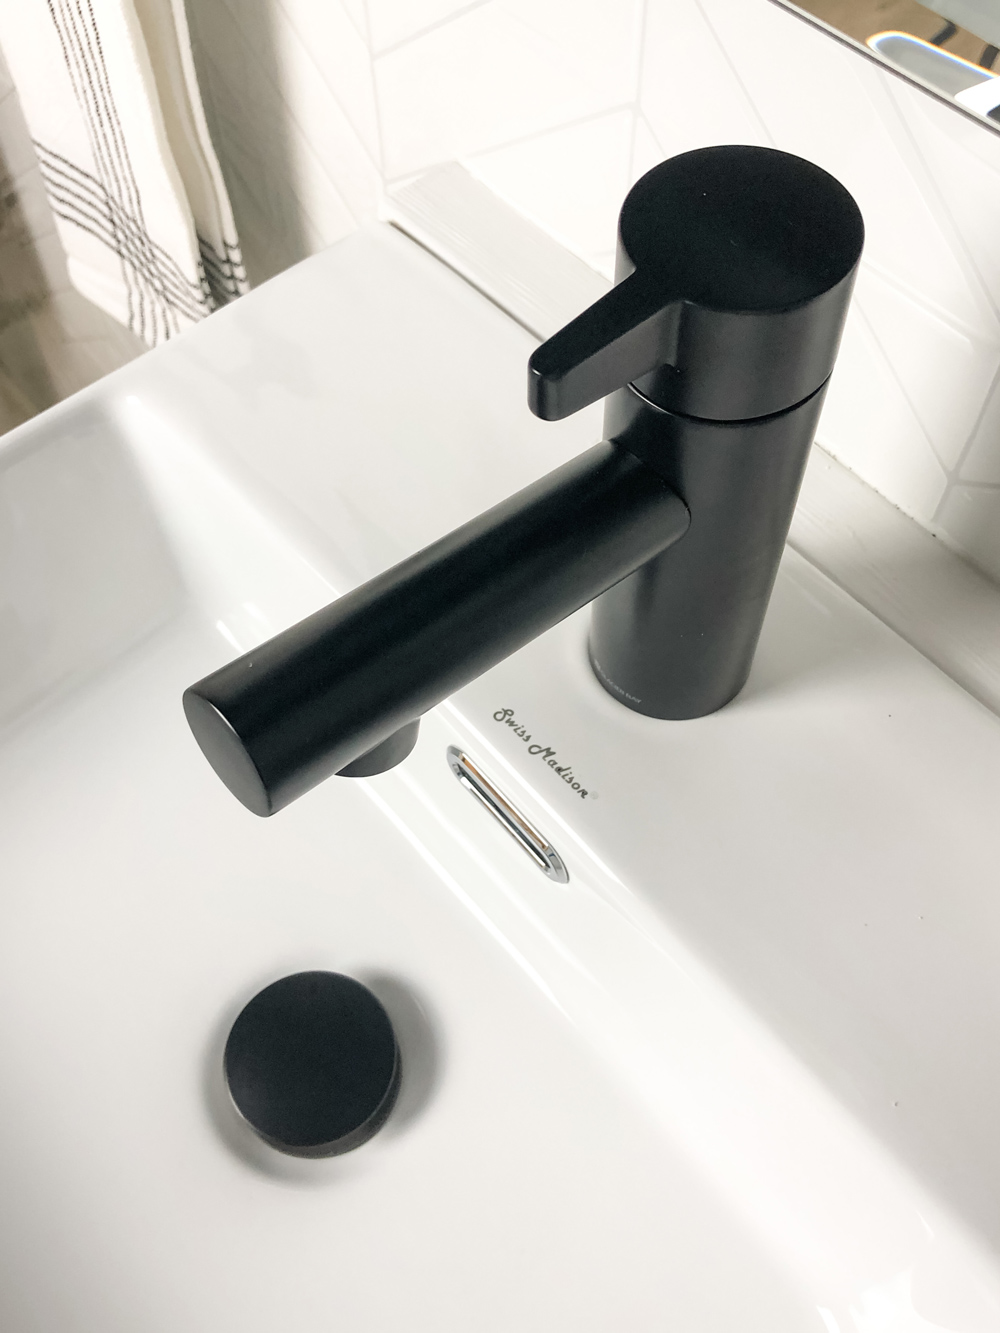 Black touchless faucet featured with white vessel sink